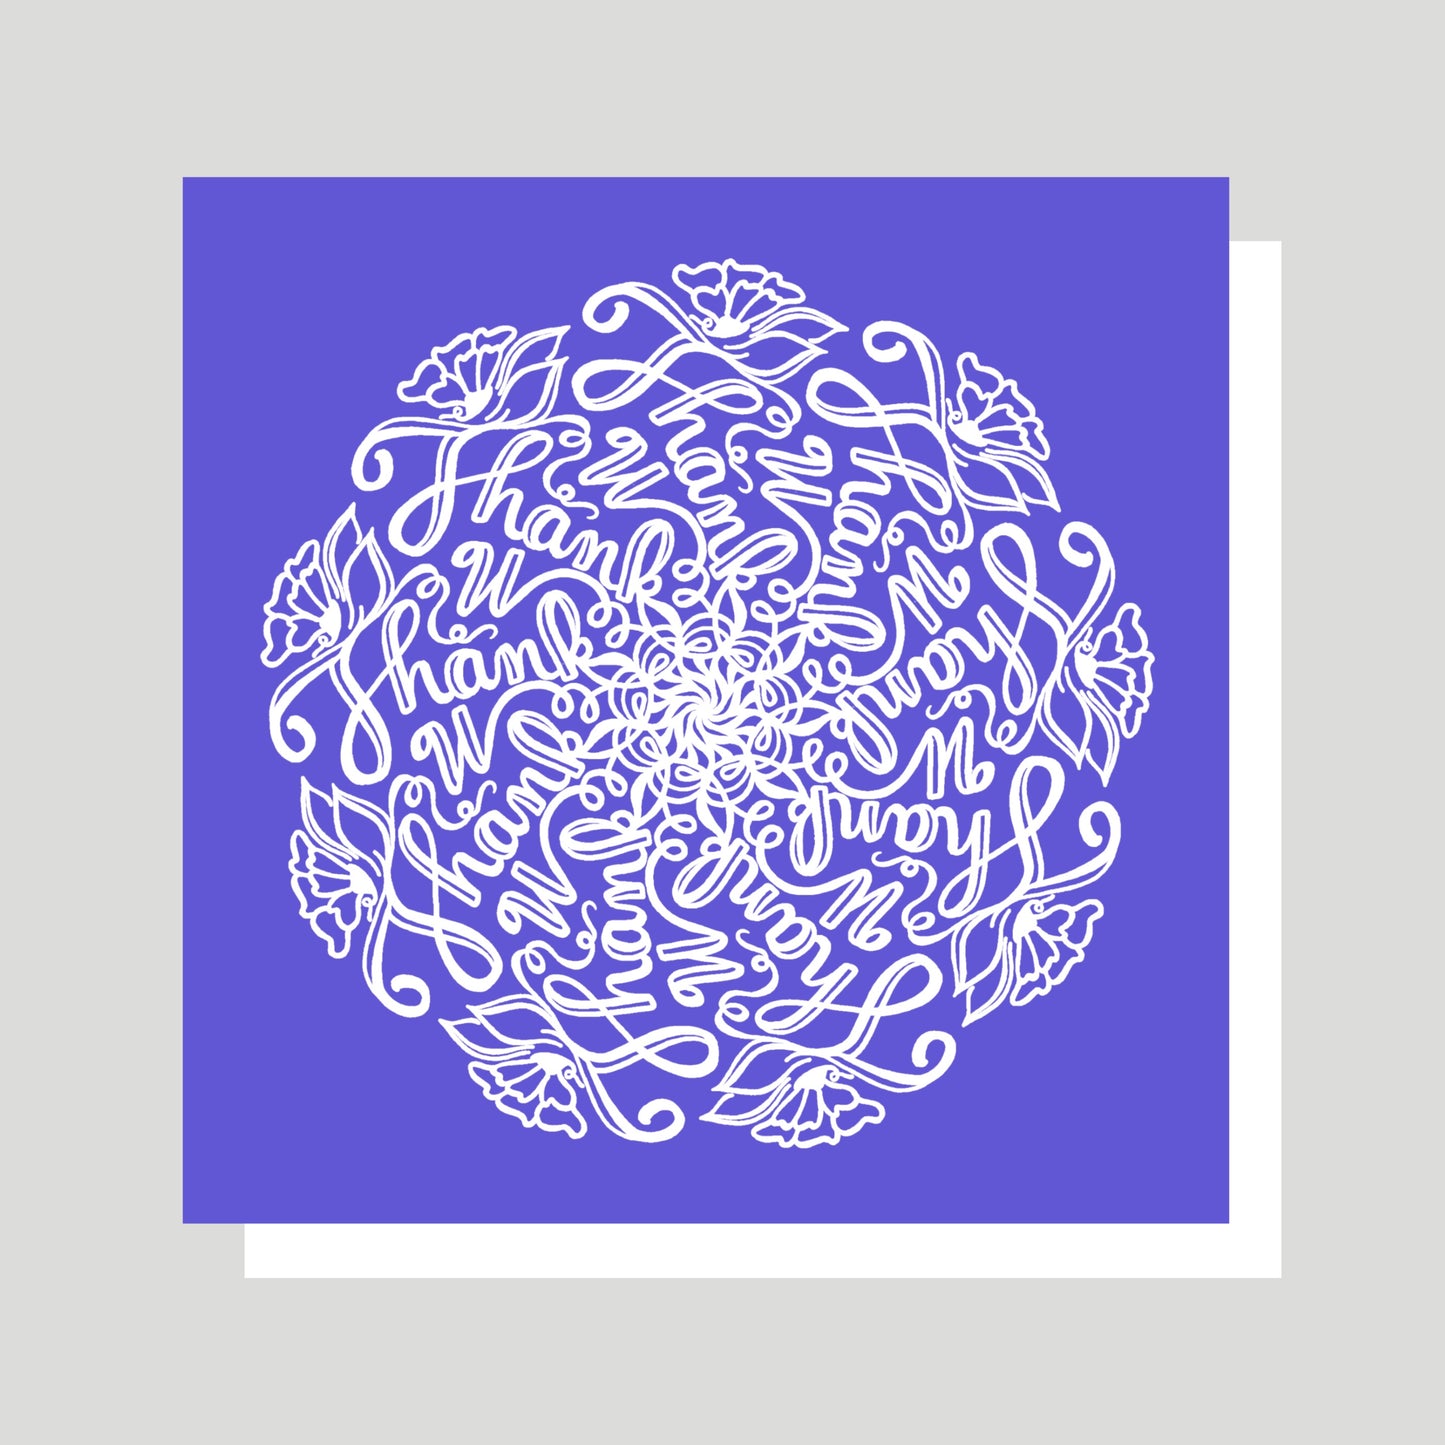 This greeting card allows the sender to say “Thank you” in a beautiful and creative Way.  The card has a deep purple background, on which a striking white mandala is printed.  The Mandala features the phrase “Thank U” nine times in a mesmerizing swirling pattern, and the pattern is adorned with flowers, leaves, and vines.  The card is blank inside so the sender can personalize a message.  This card features the art of Jennifer Knight.  Newwingstudio.com